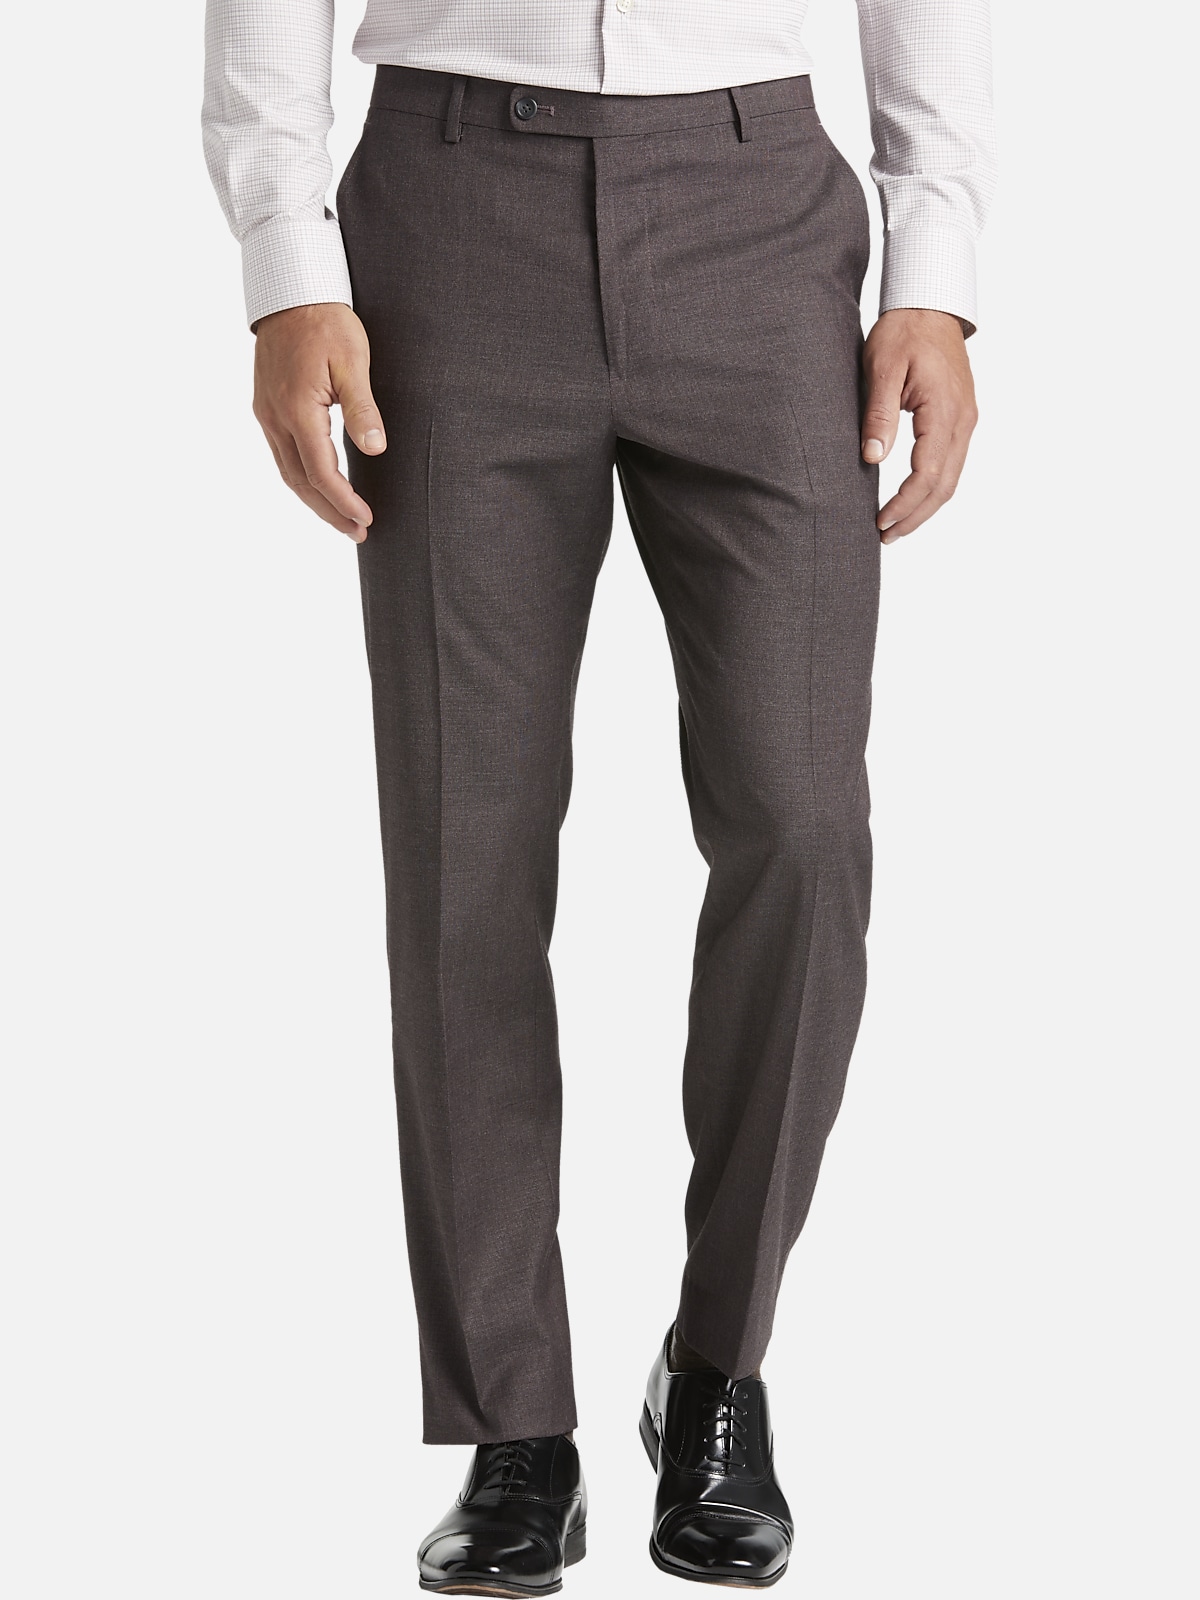 Pronto Uomo Modern Fit Suit Separates Pants | All Clearance $39.99| Men ...